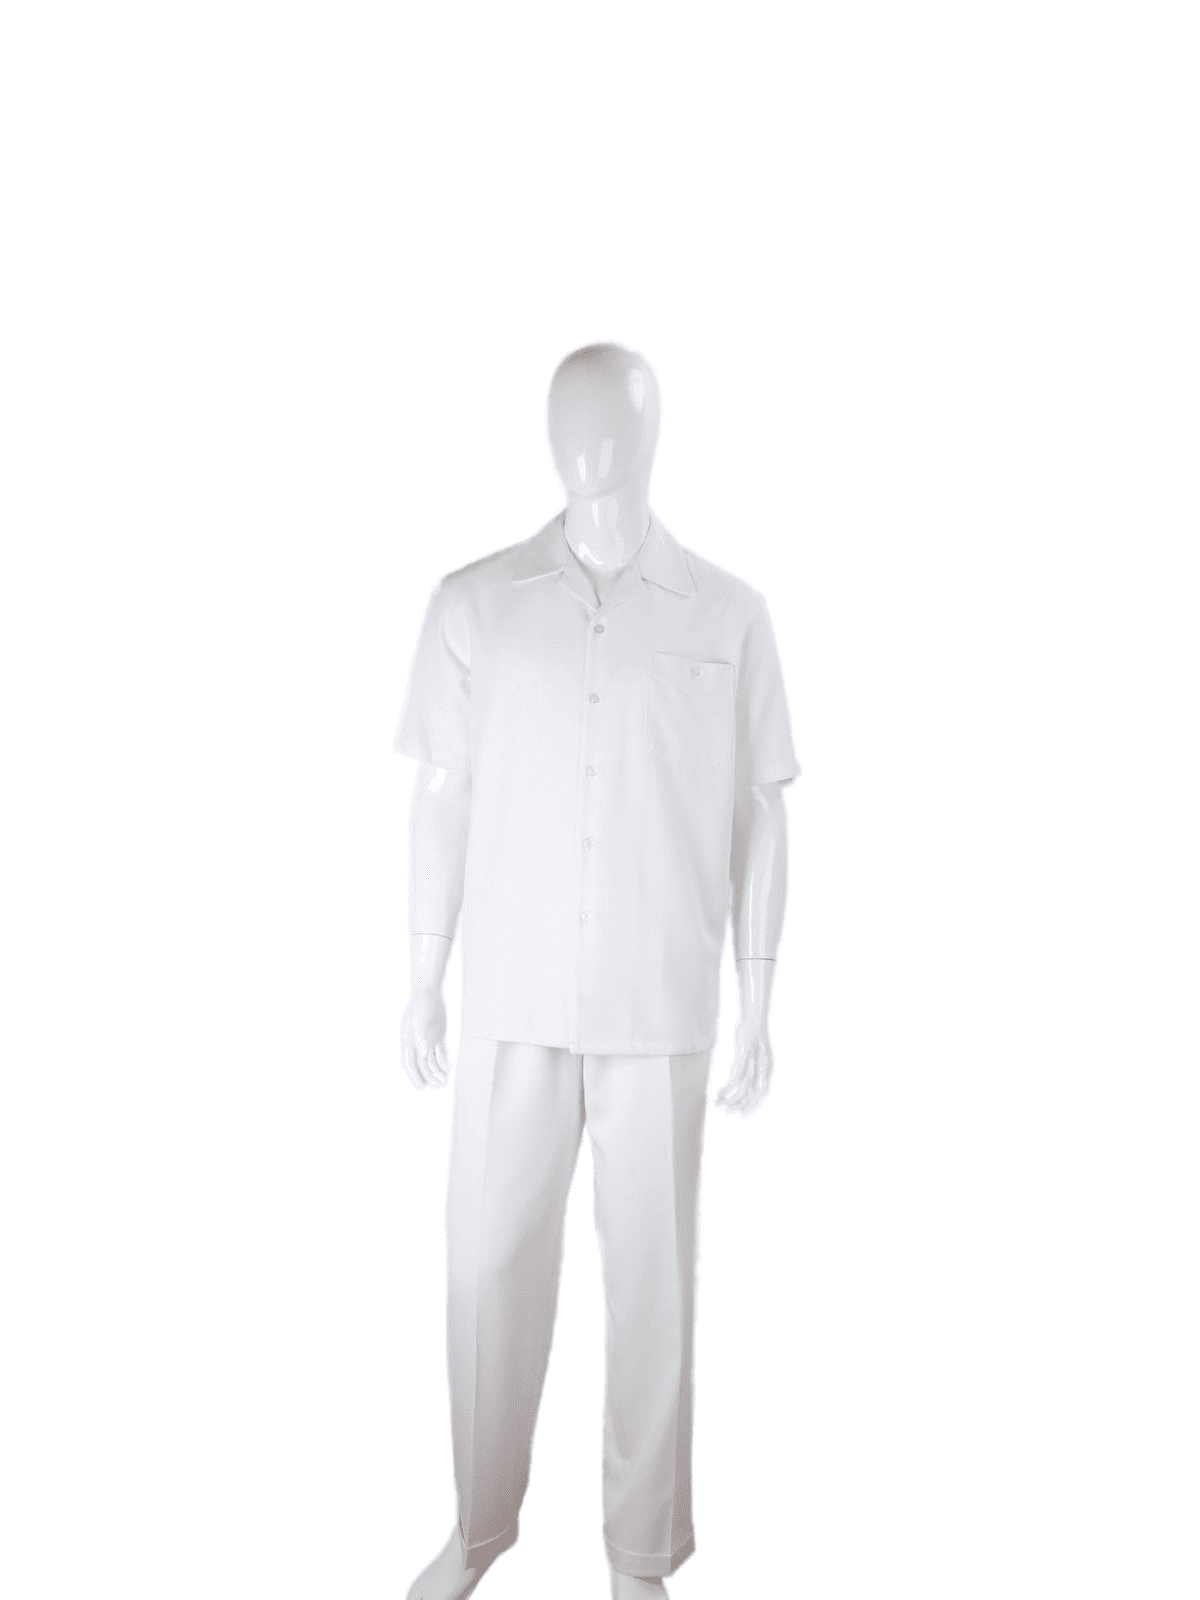 Apollo King SUITS Apollo King Royal Diamond Solid White Classic Fit 2 Piece Walking Suit